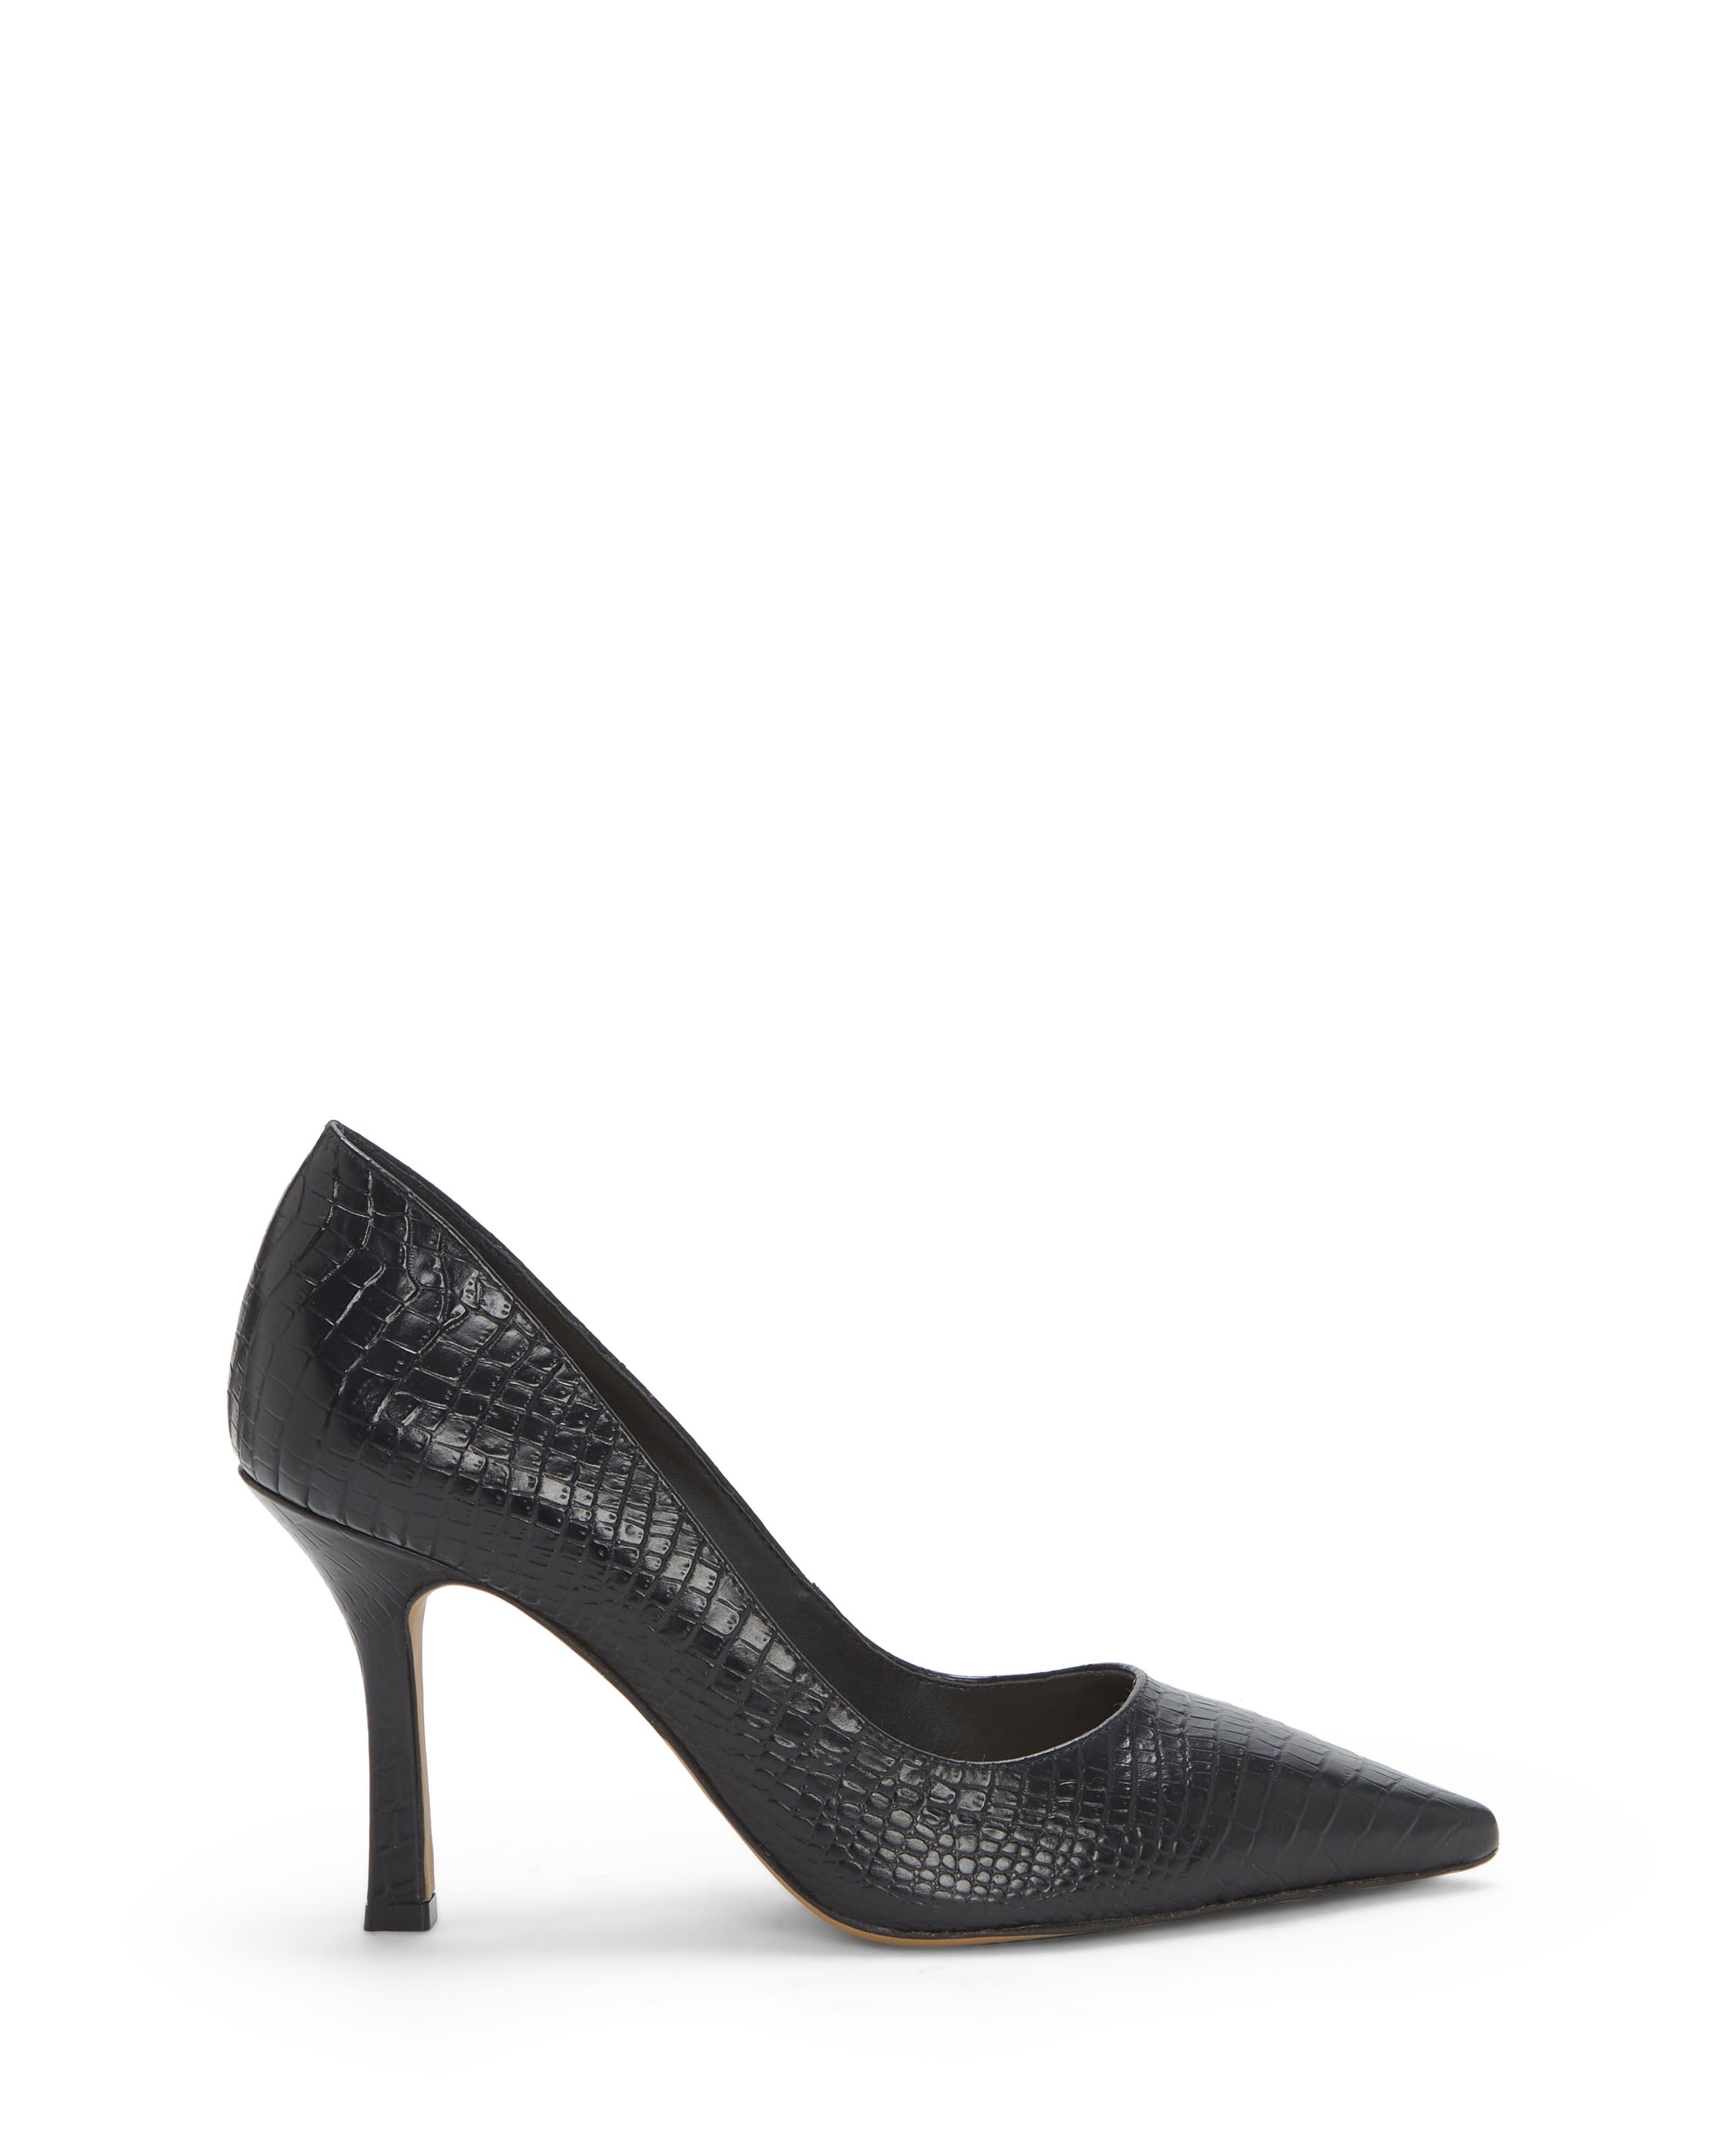 Avaden Point-Toe Pump | Vince Camuto